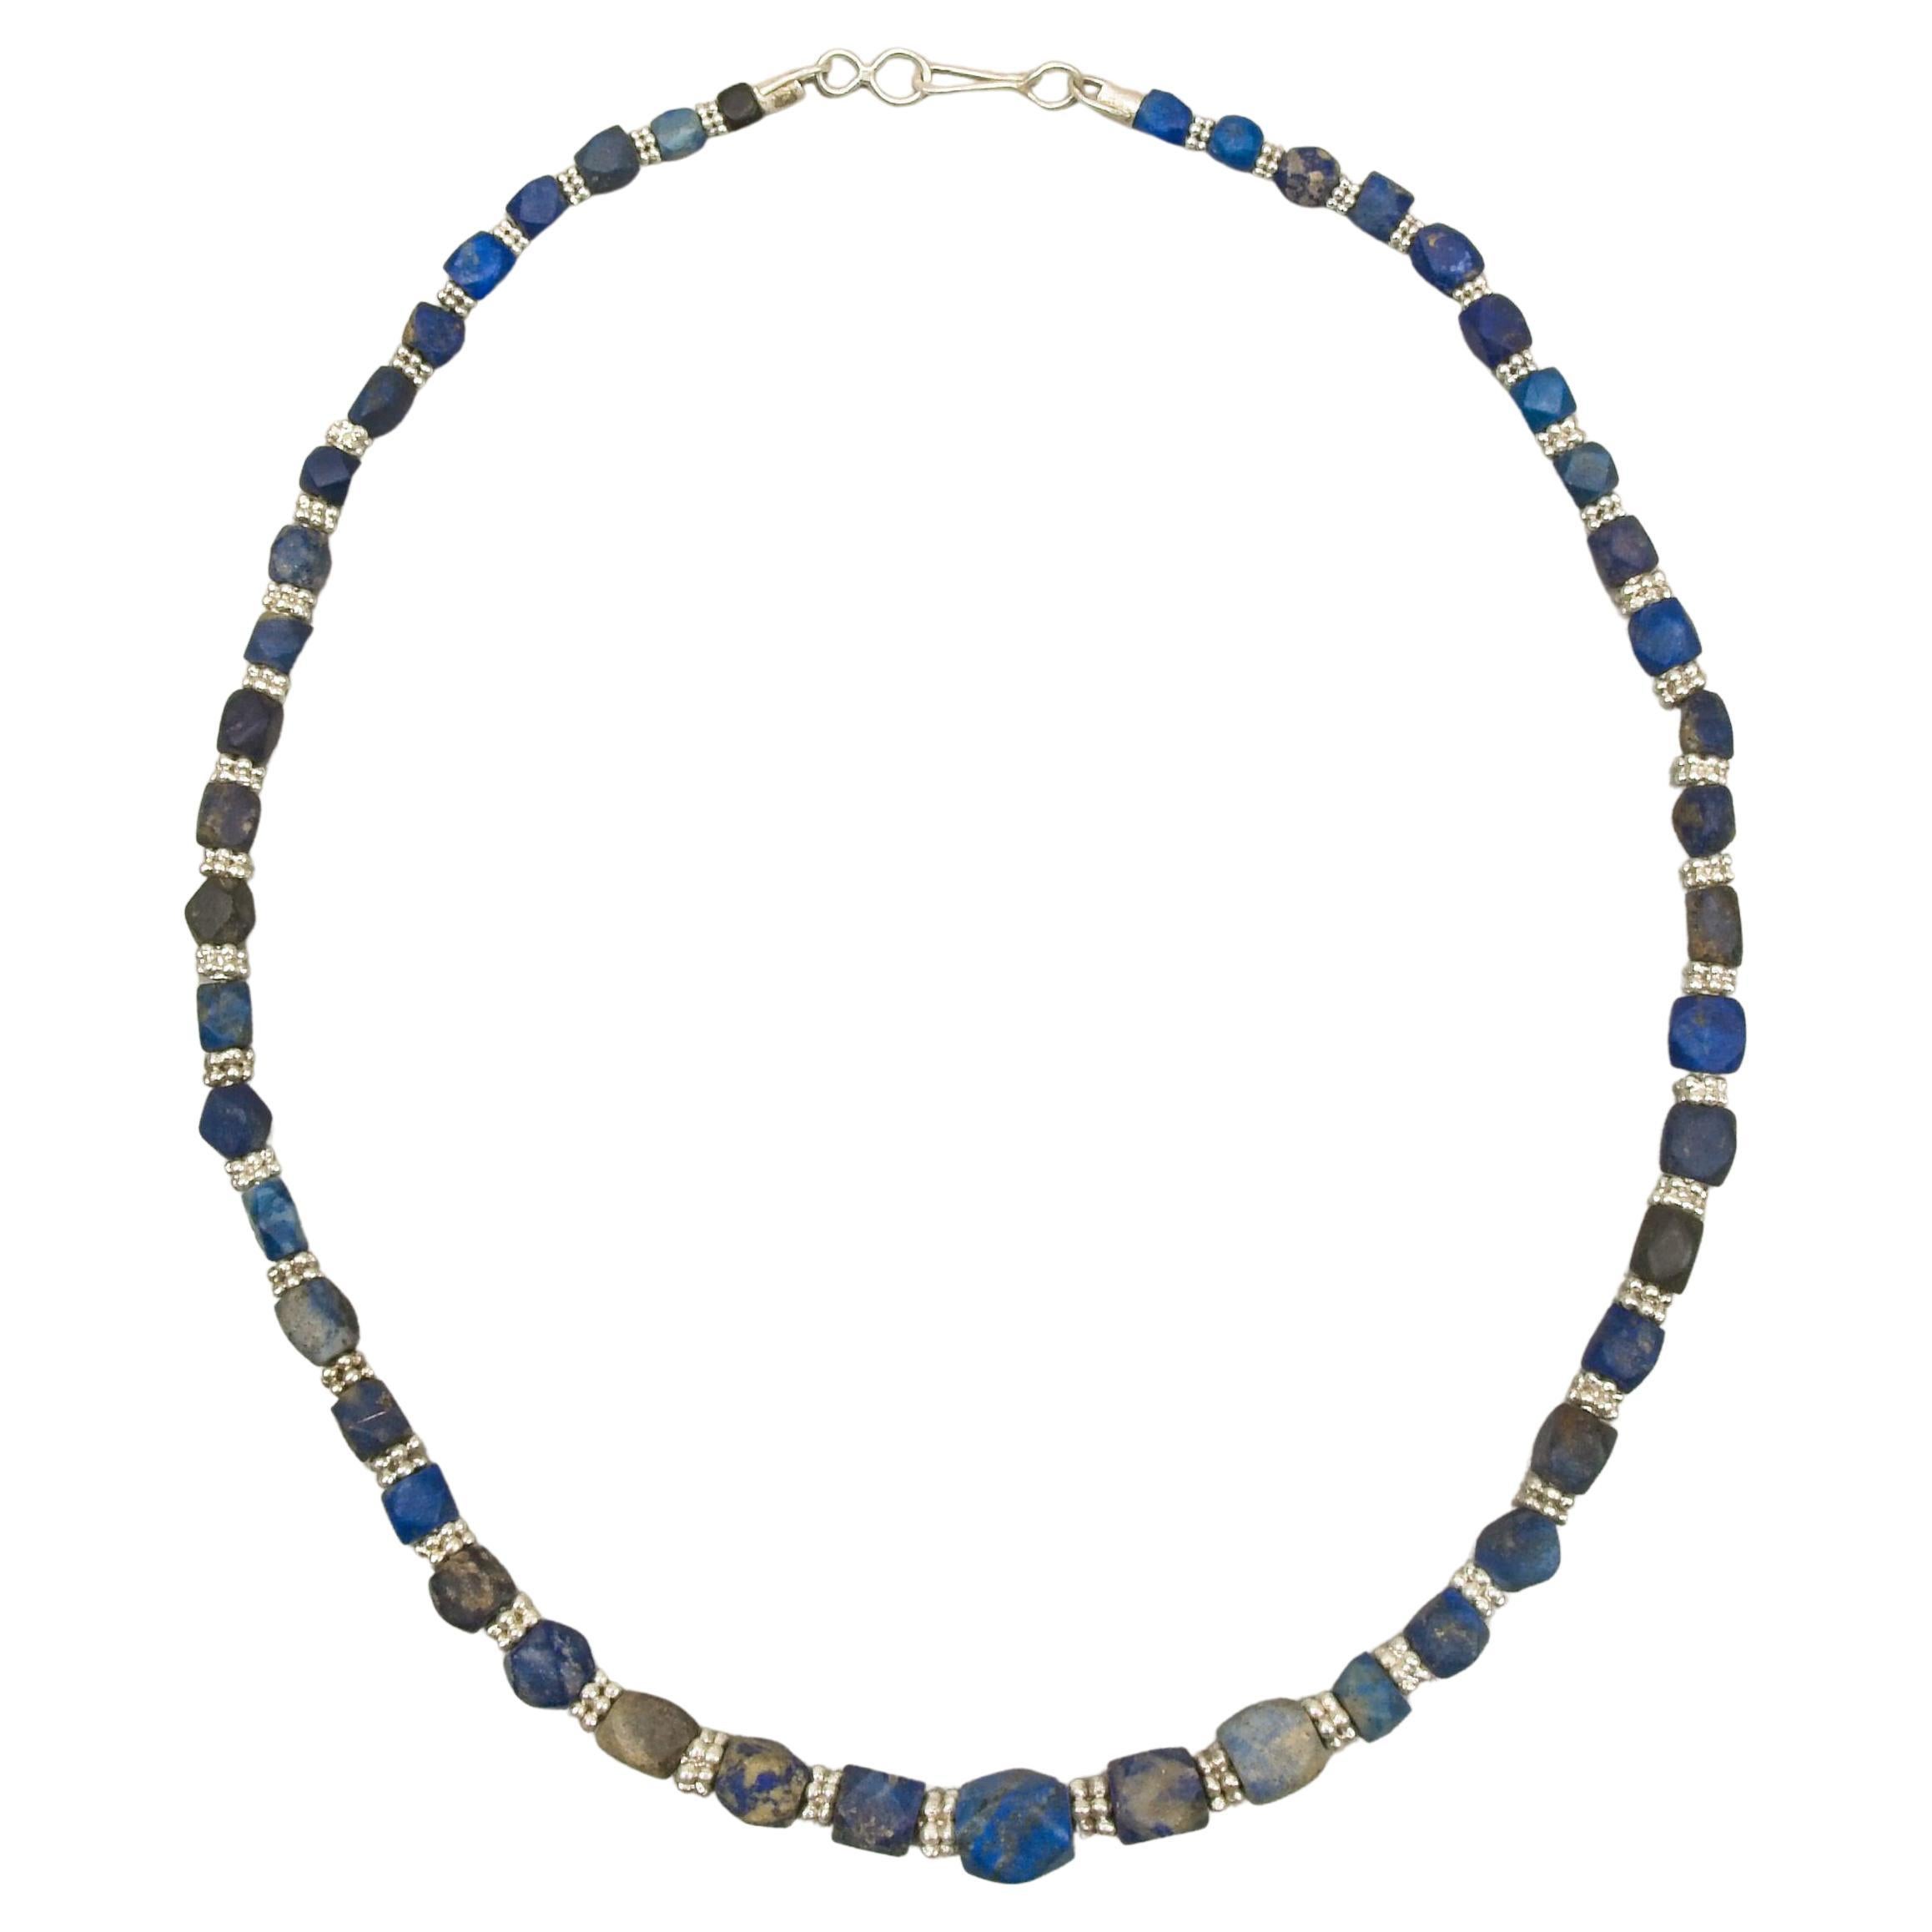 Ancient Lapis Lazuli Cornerless Cube Beads, Granulated Silver Spacer Beads For Sale